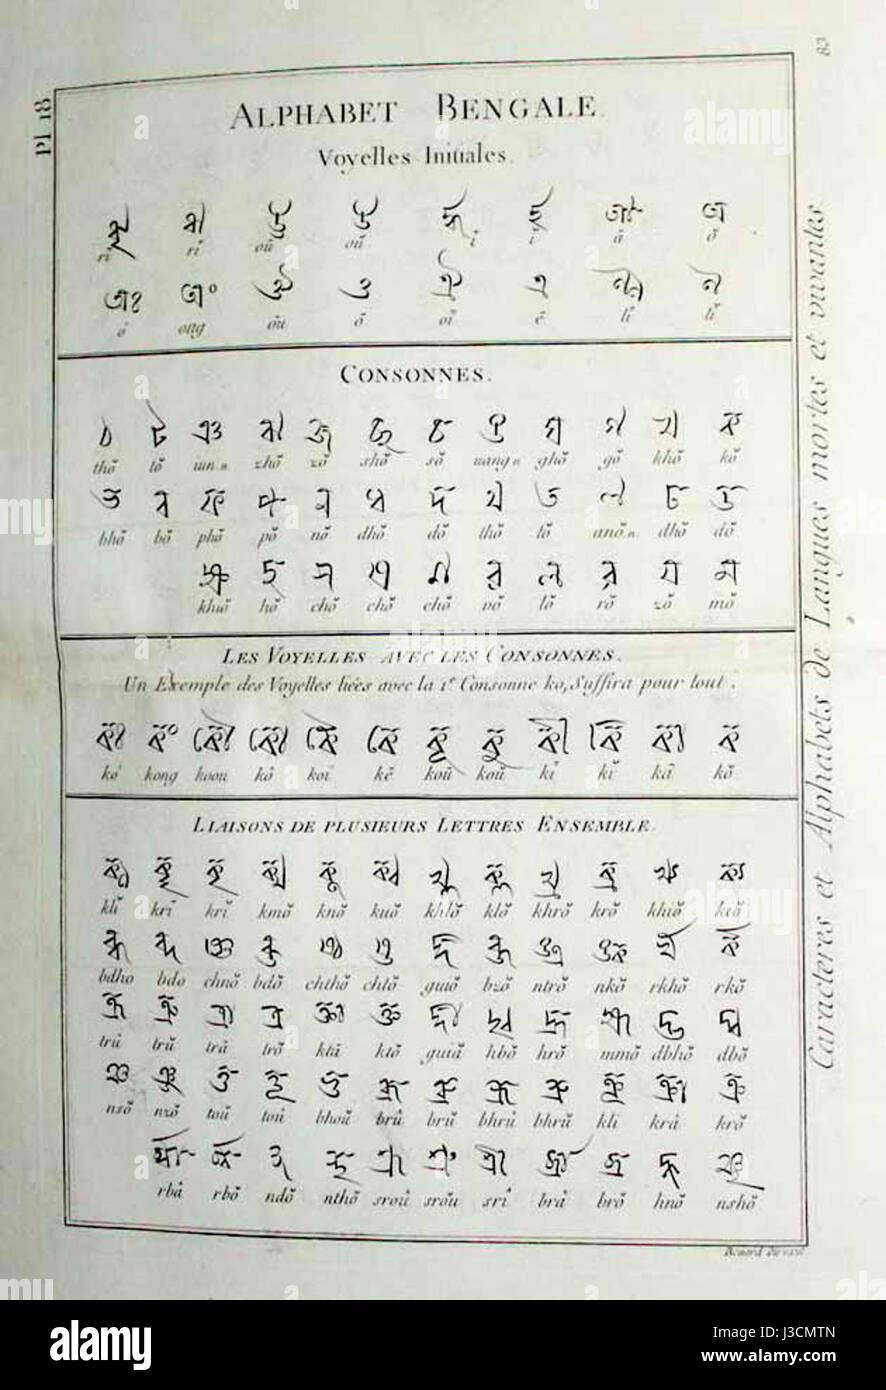 Diderot, the French Encyclopedist, included in his vast work this chart of the Bengali alphabet Stock Photo